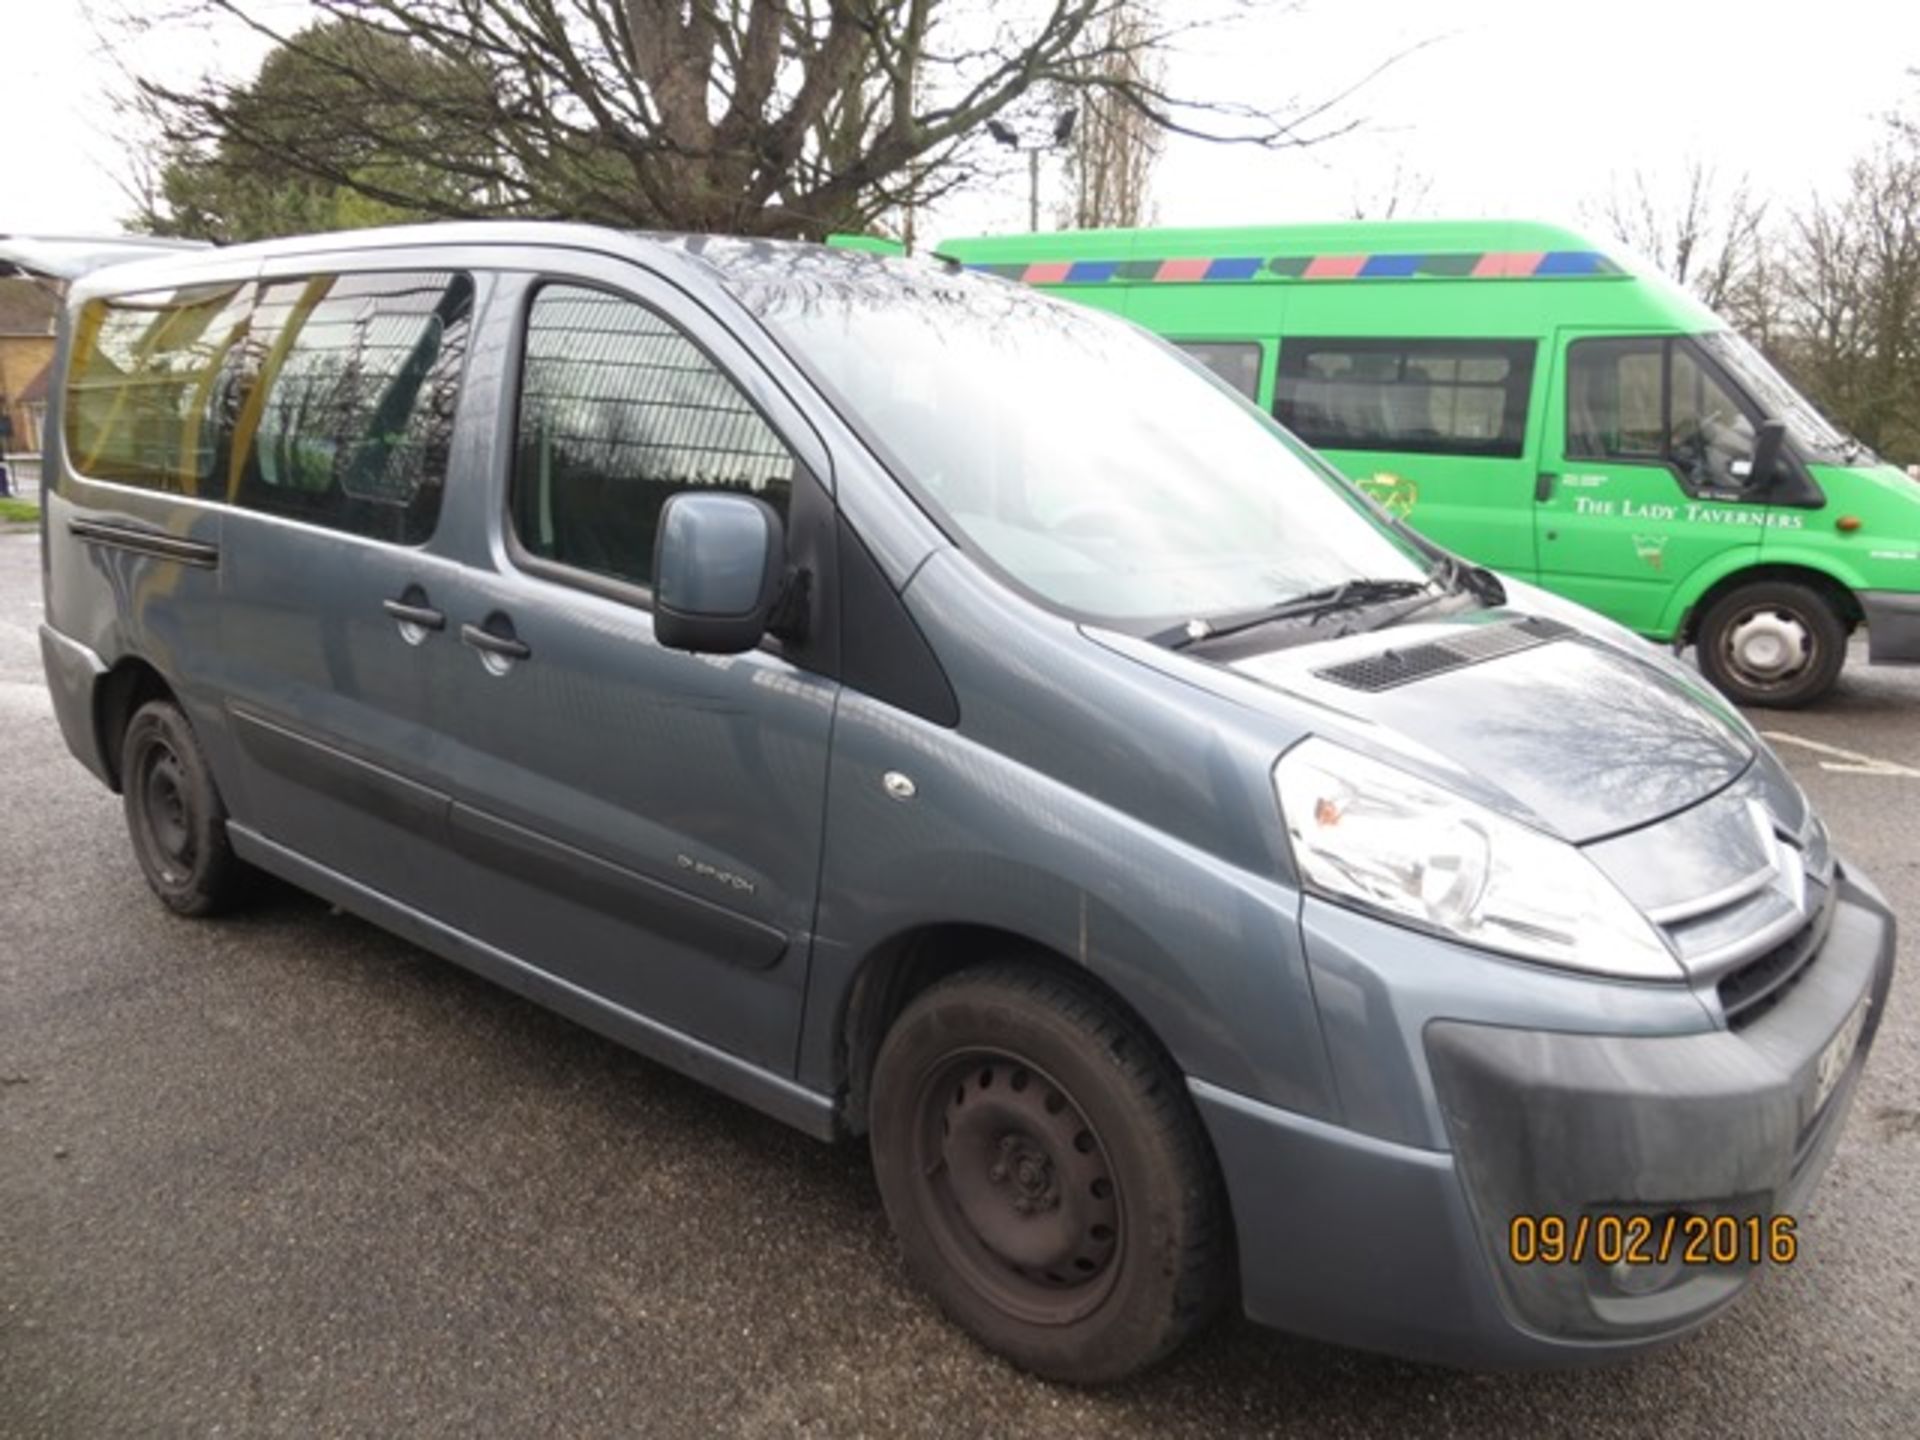 Citroen Dispatch 6 seater minibus C/W wheel chair lift and access YJ58 XNT mileage 150,445km Vehicle - Image 2 of 6